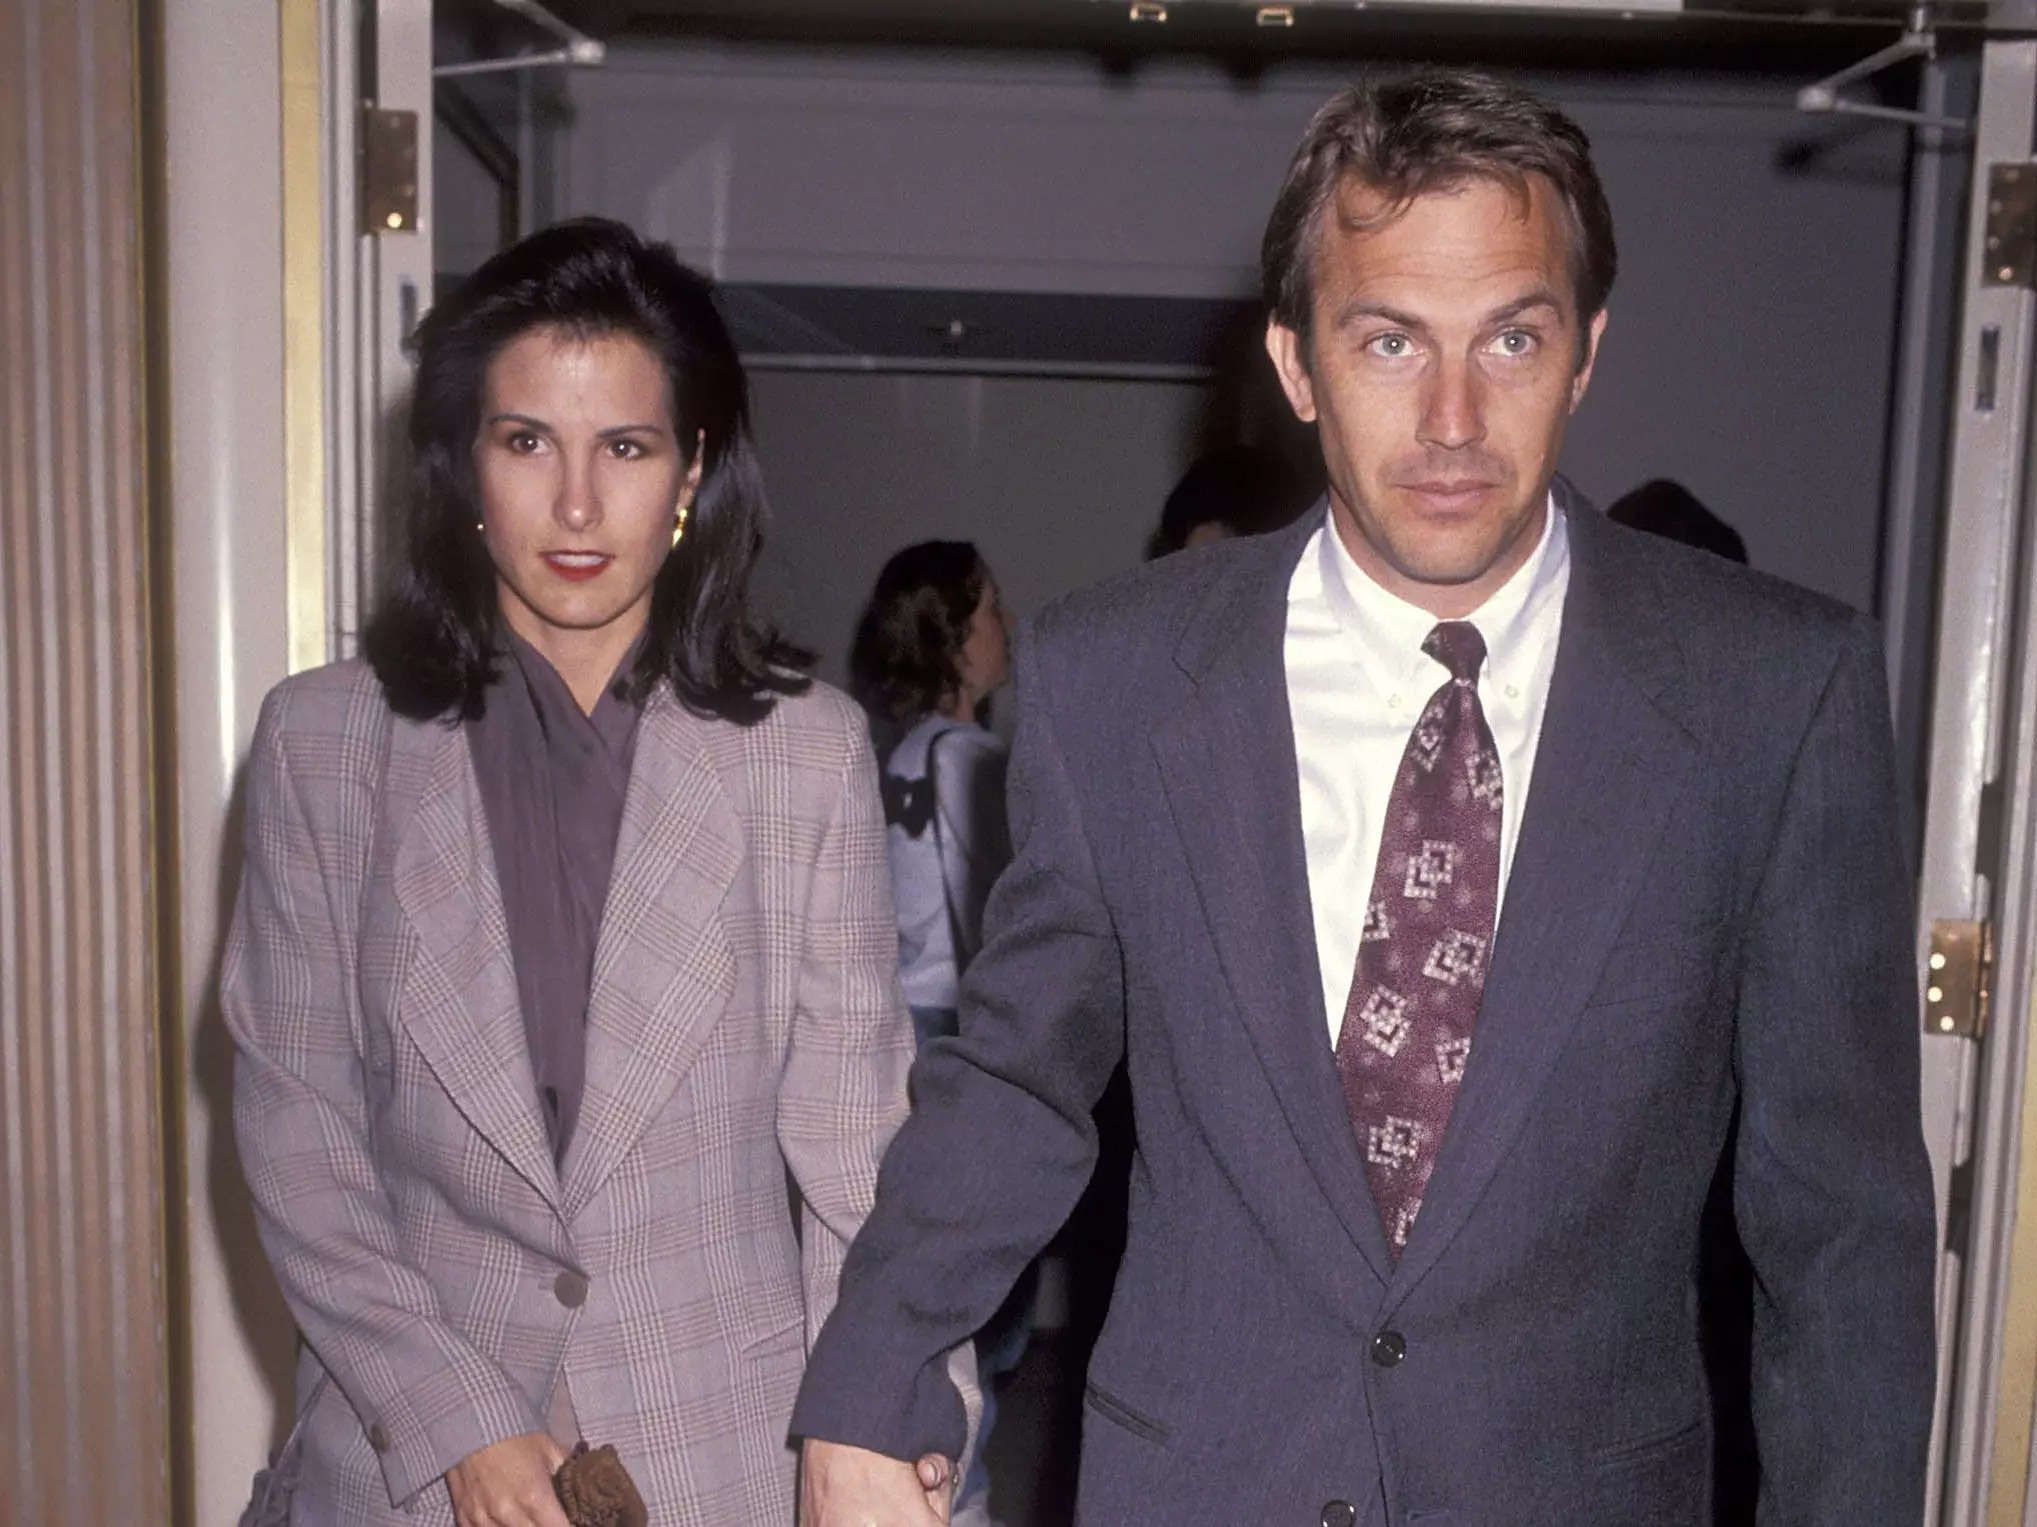 Kevin Costner and his first wife Cindy Silva were married between 1978 and 1994.